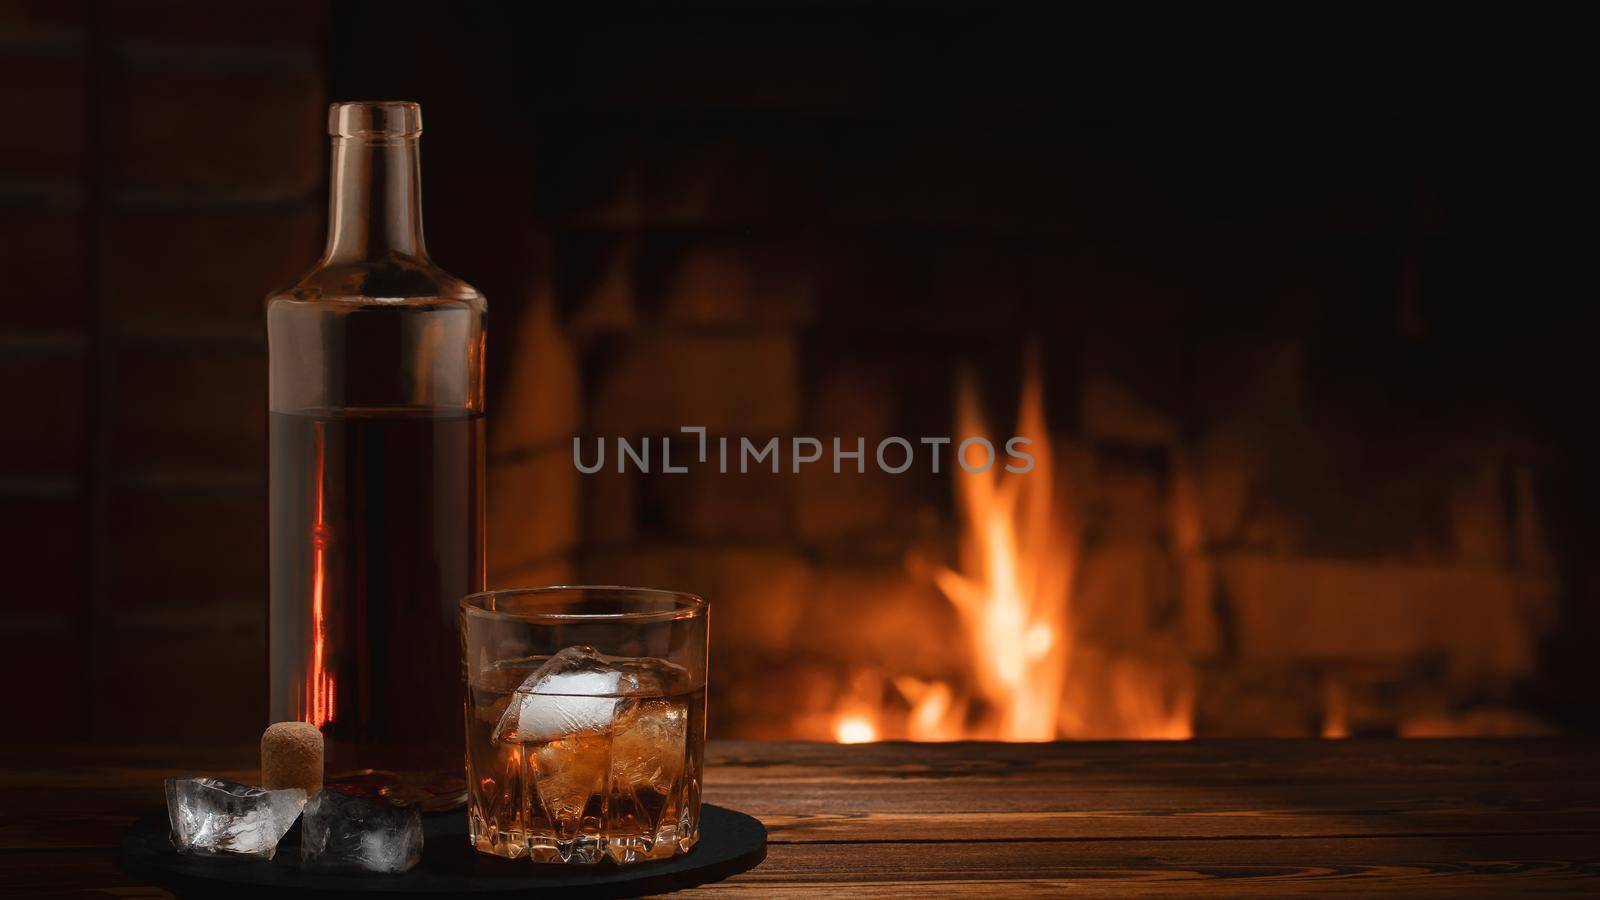 Bottle and glass of whiskey with ice on the table near the burning fireplace. Rest and relaxation concept.